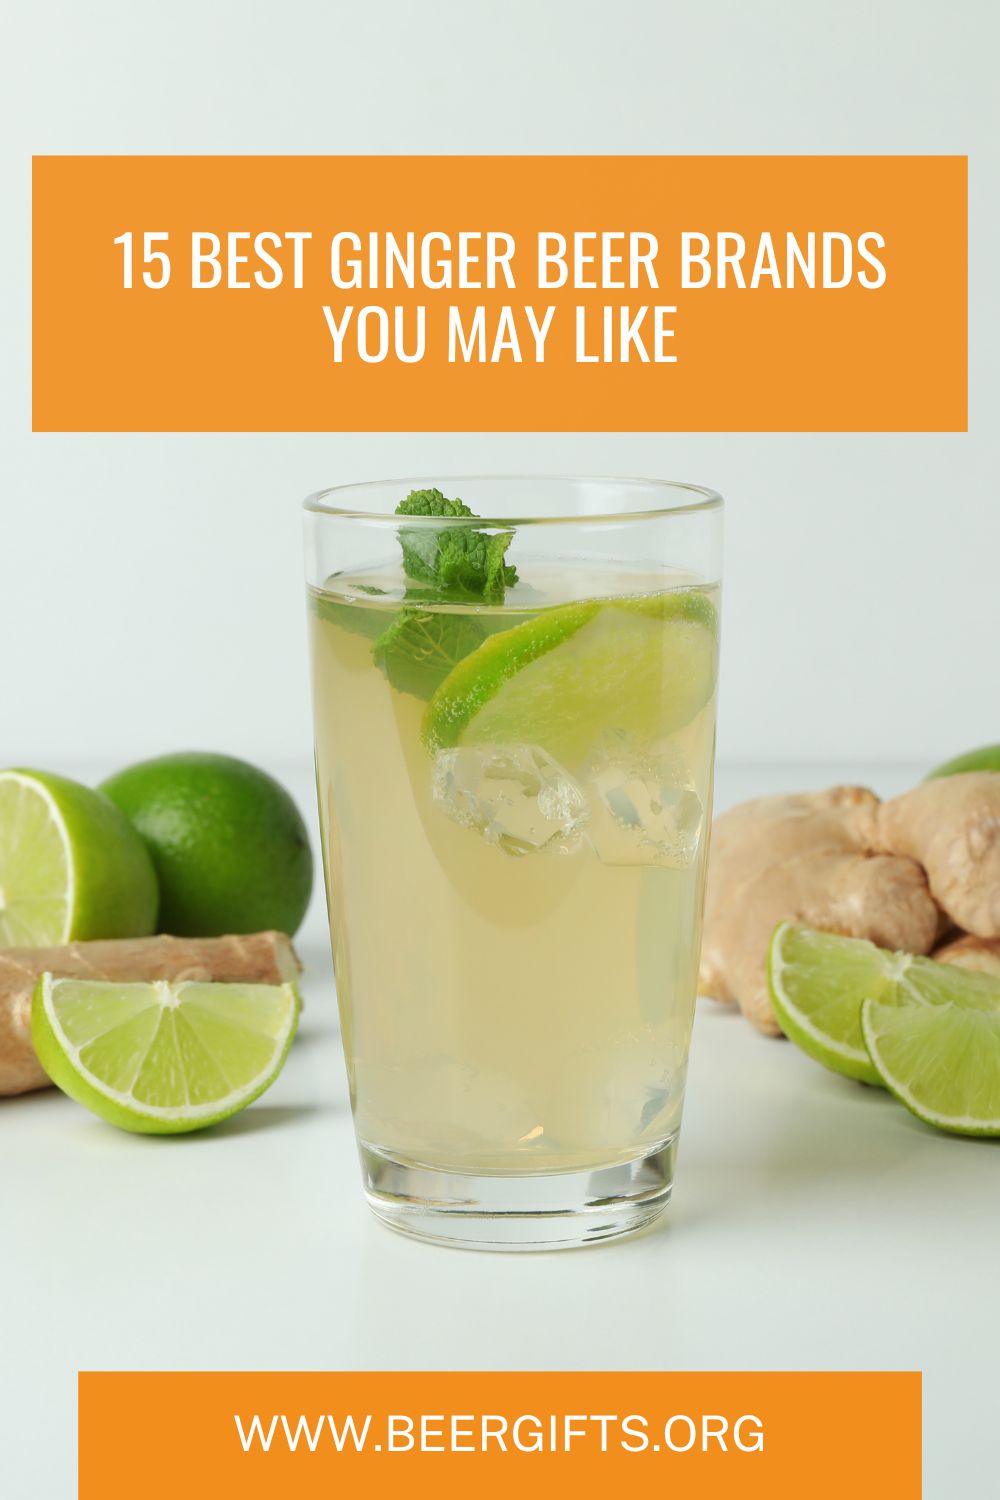 15 Best Ginger Beer Brands You May Like1